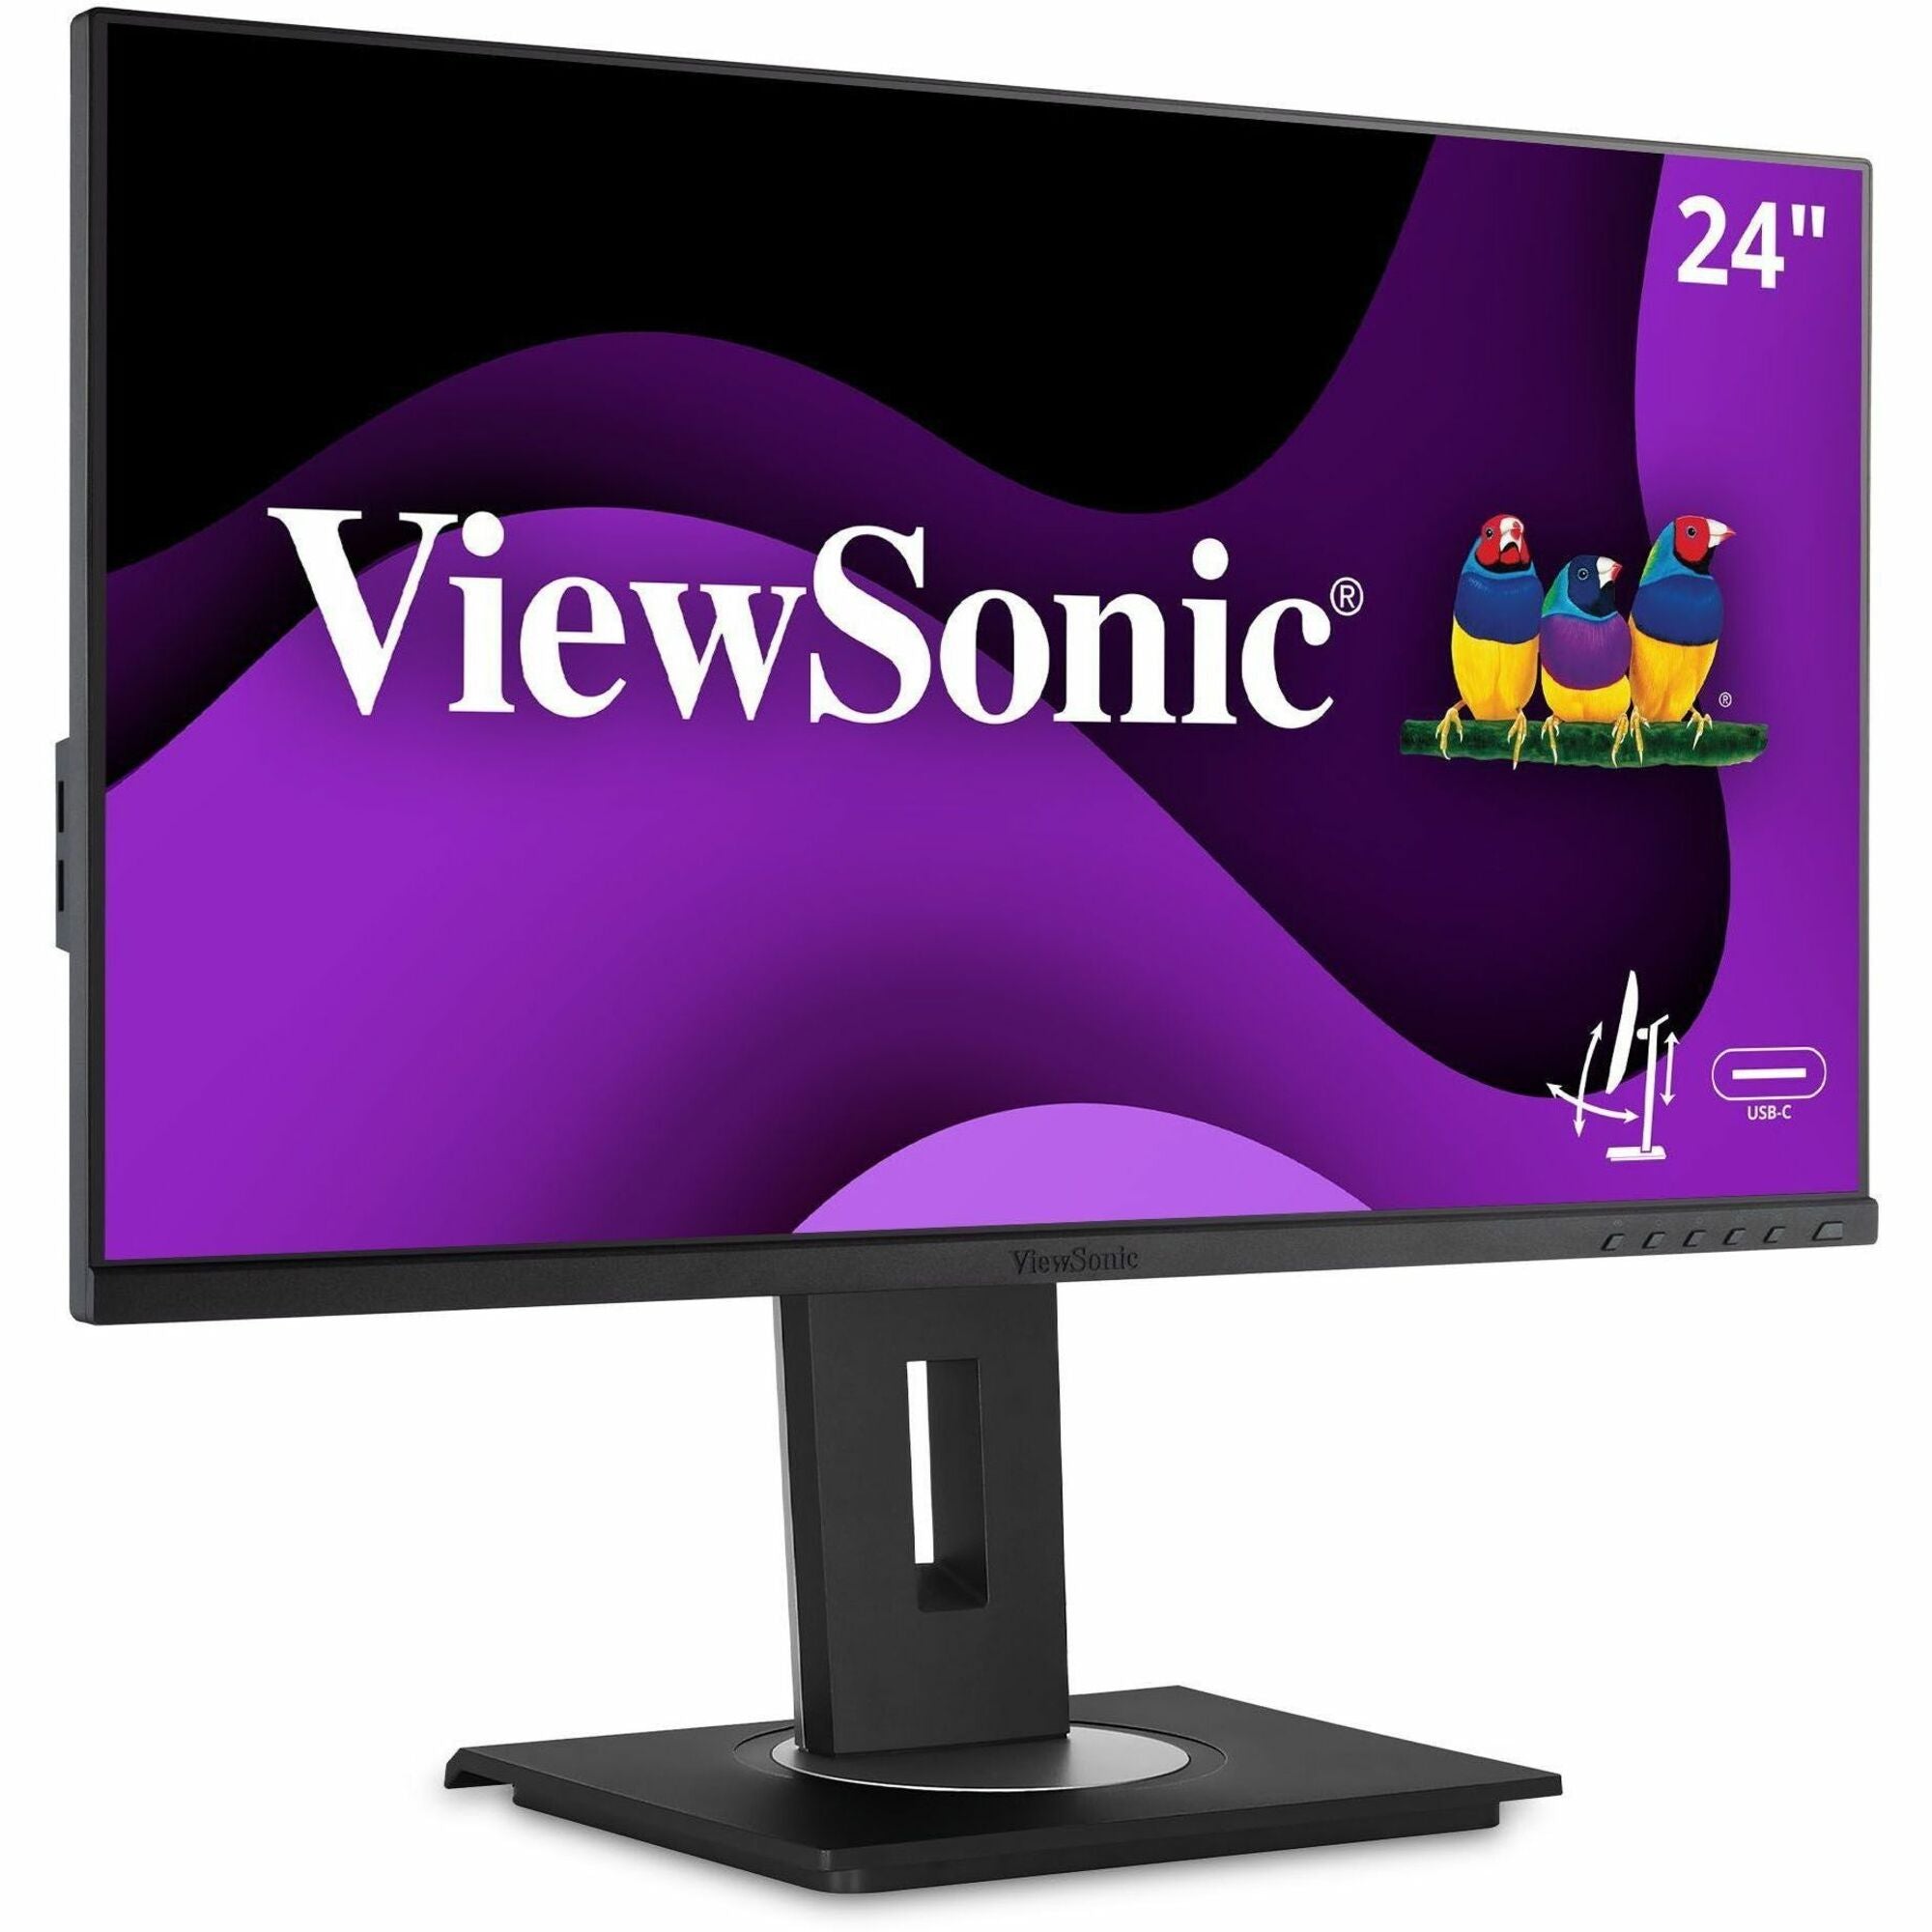 ViewSonic VG2456 24 Inch 1080p Monitor with USB C 3.2, Docking Built-In Gigabit Ethernet and 40 Degree Tilt Ergonomics for Home and Office - VG2456